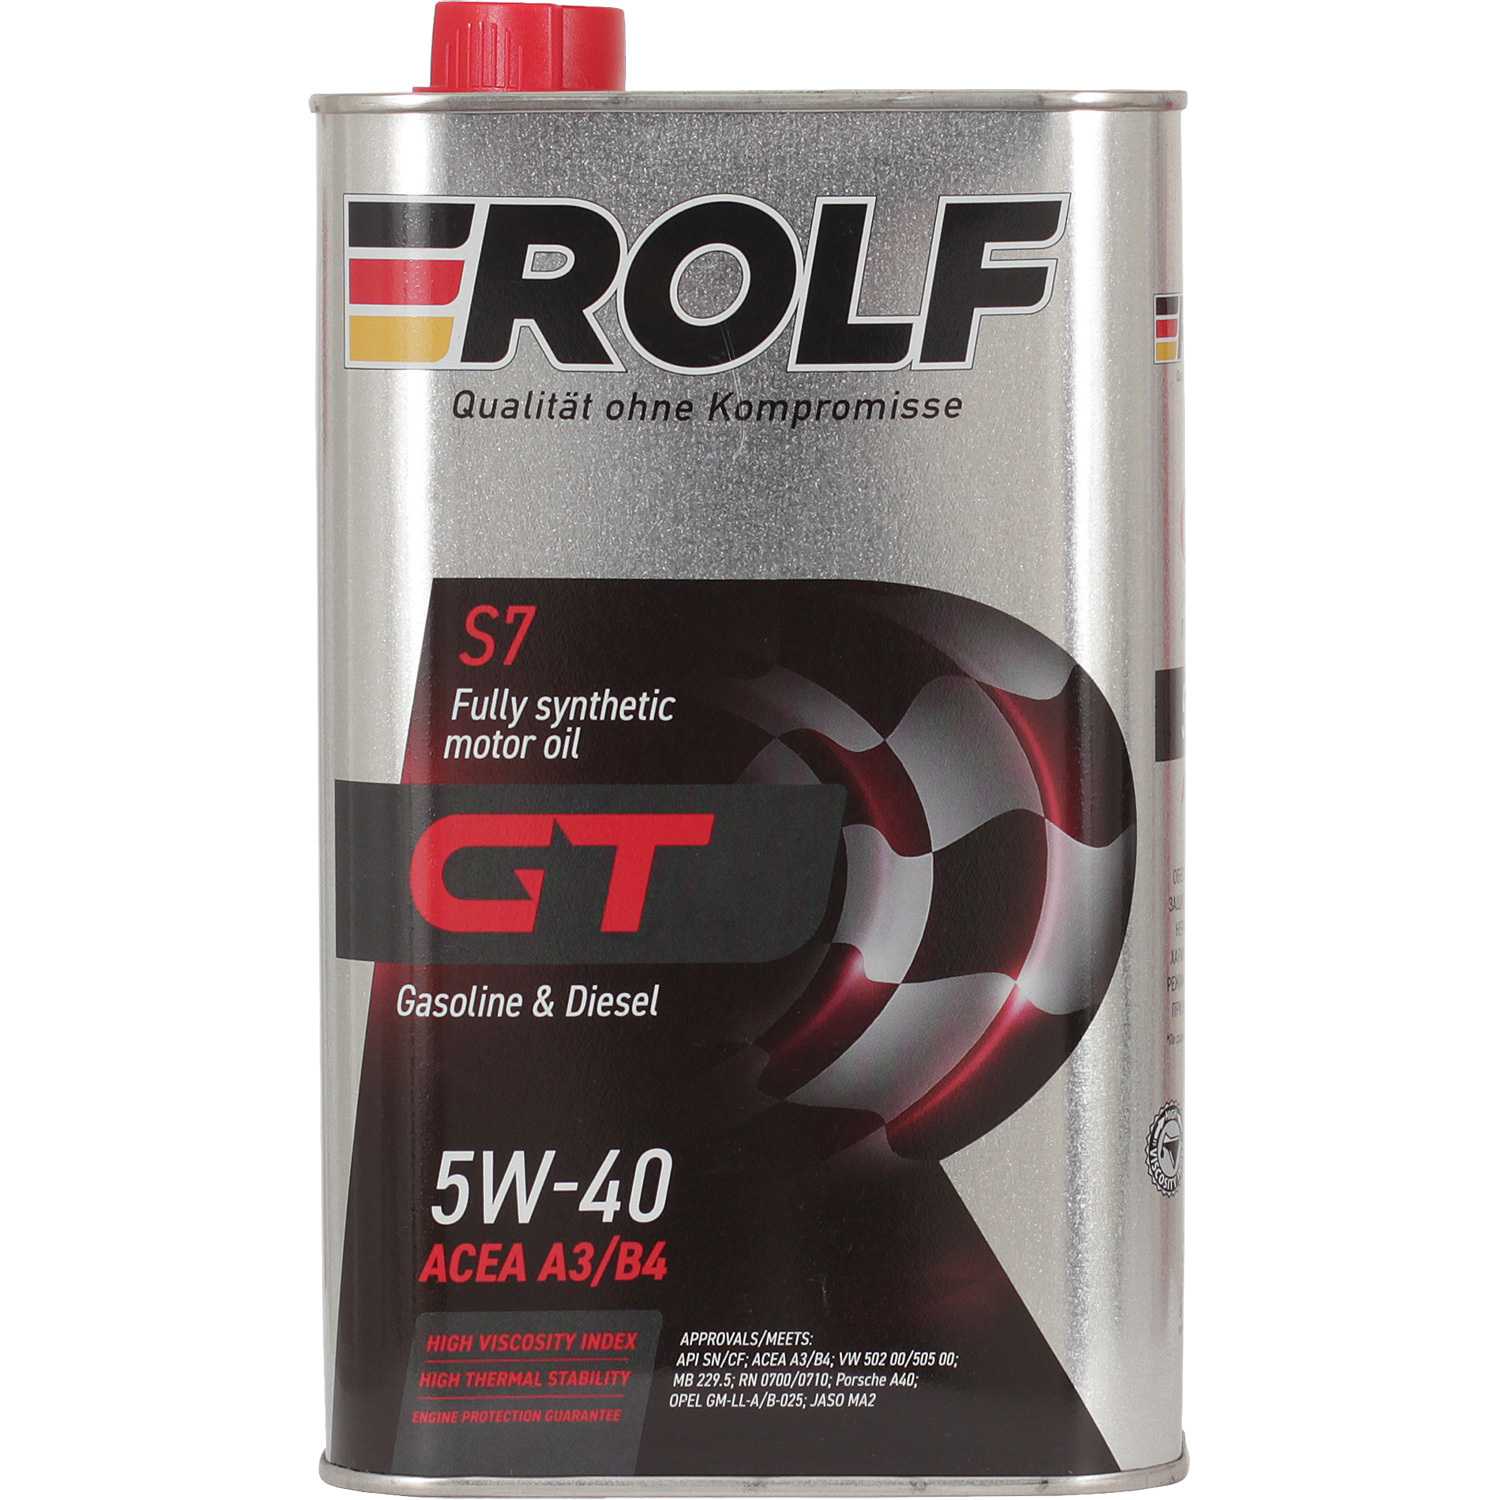 Rolf Моторное масло Rolf GT 5W-40, 1 л rolf моторное масло rolf gt 5w 40 1 л